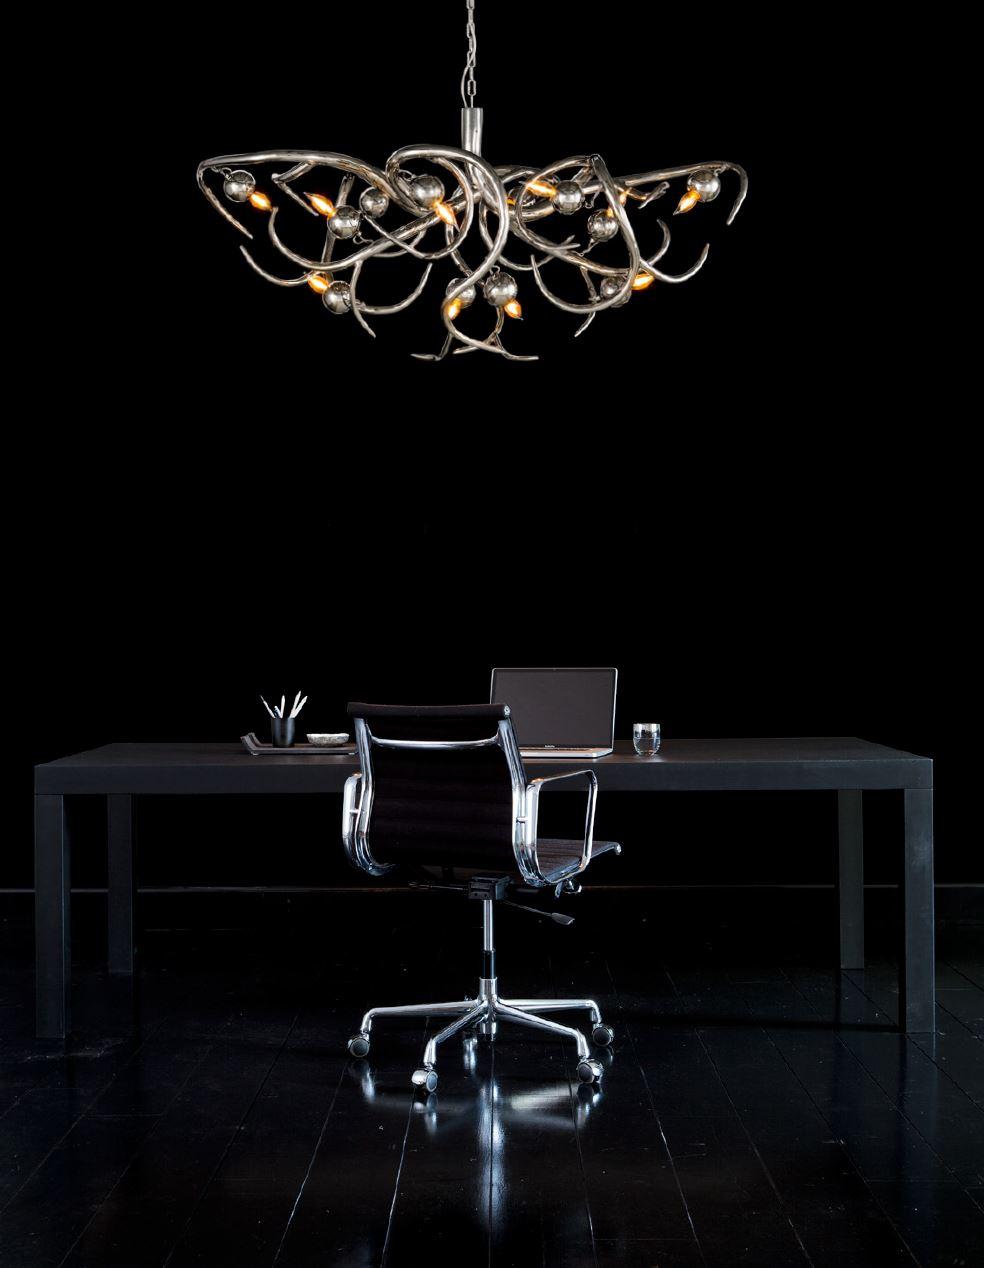 Hand-Crafted Modern Chandelier in a Nickel Finish, Eve Collection, by Brand Van Egmond For Sale